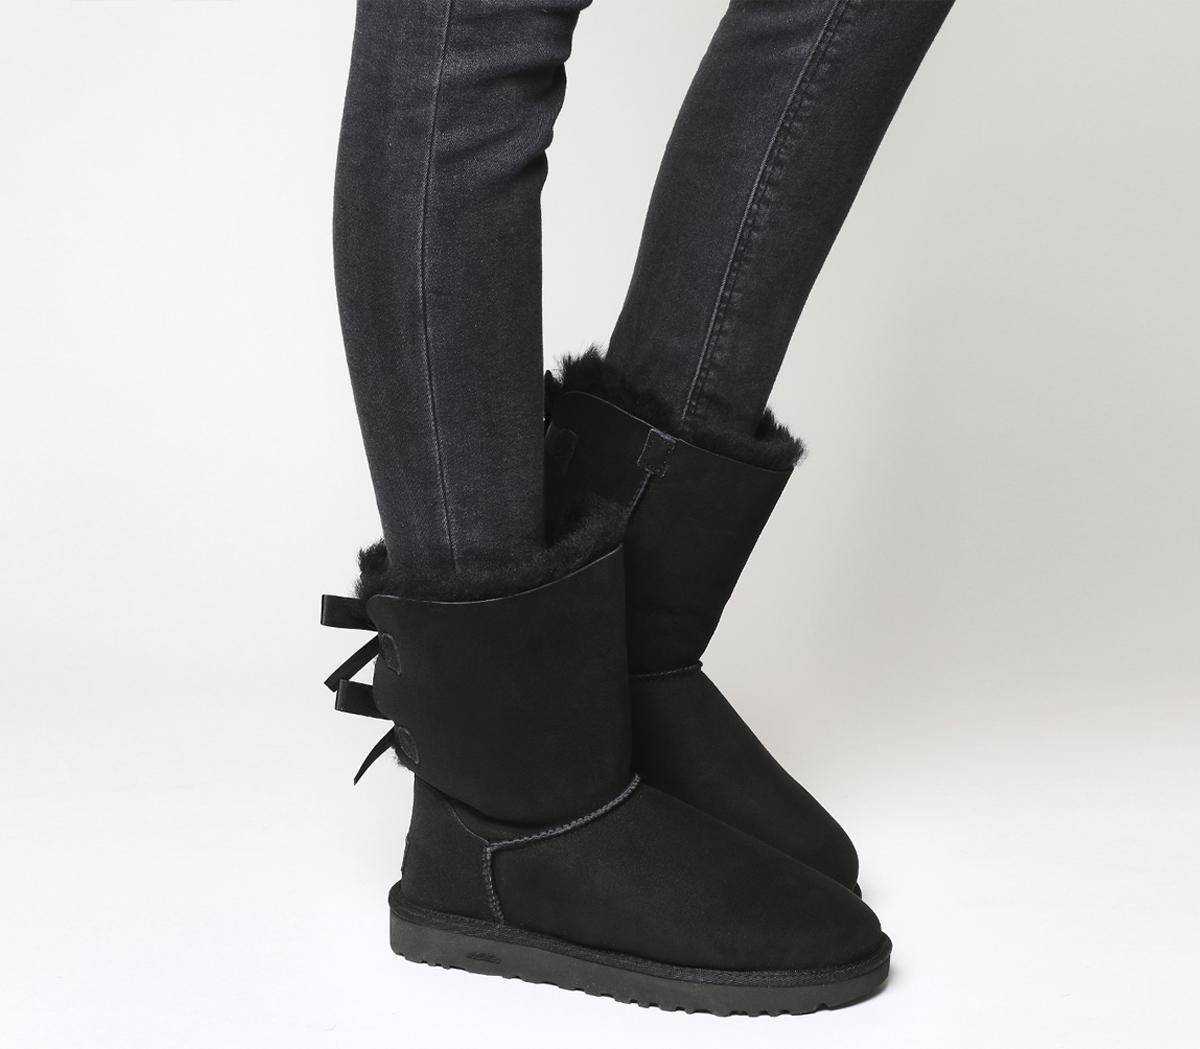 black ankle boots with bow